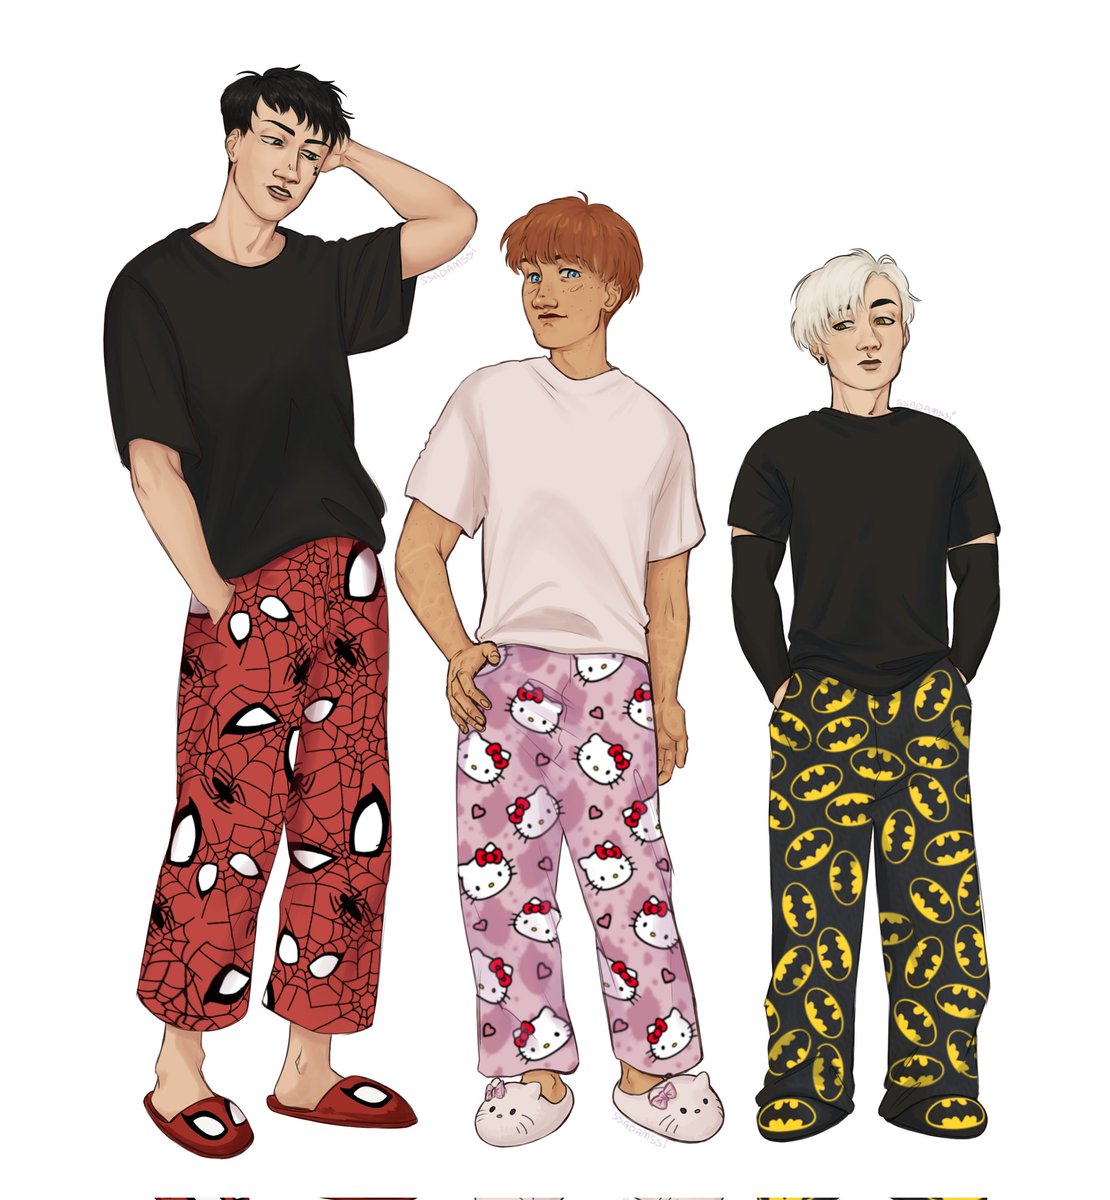 These are their canonical everyday outfits 
#kevinday #neiljosten #ANDREWMINYARD  #aftg #взг